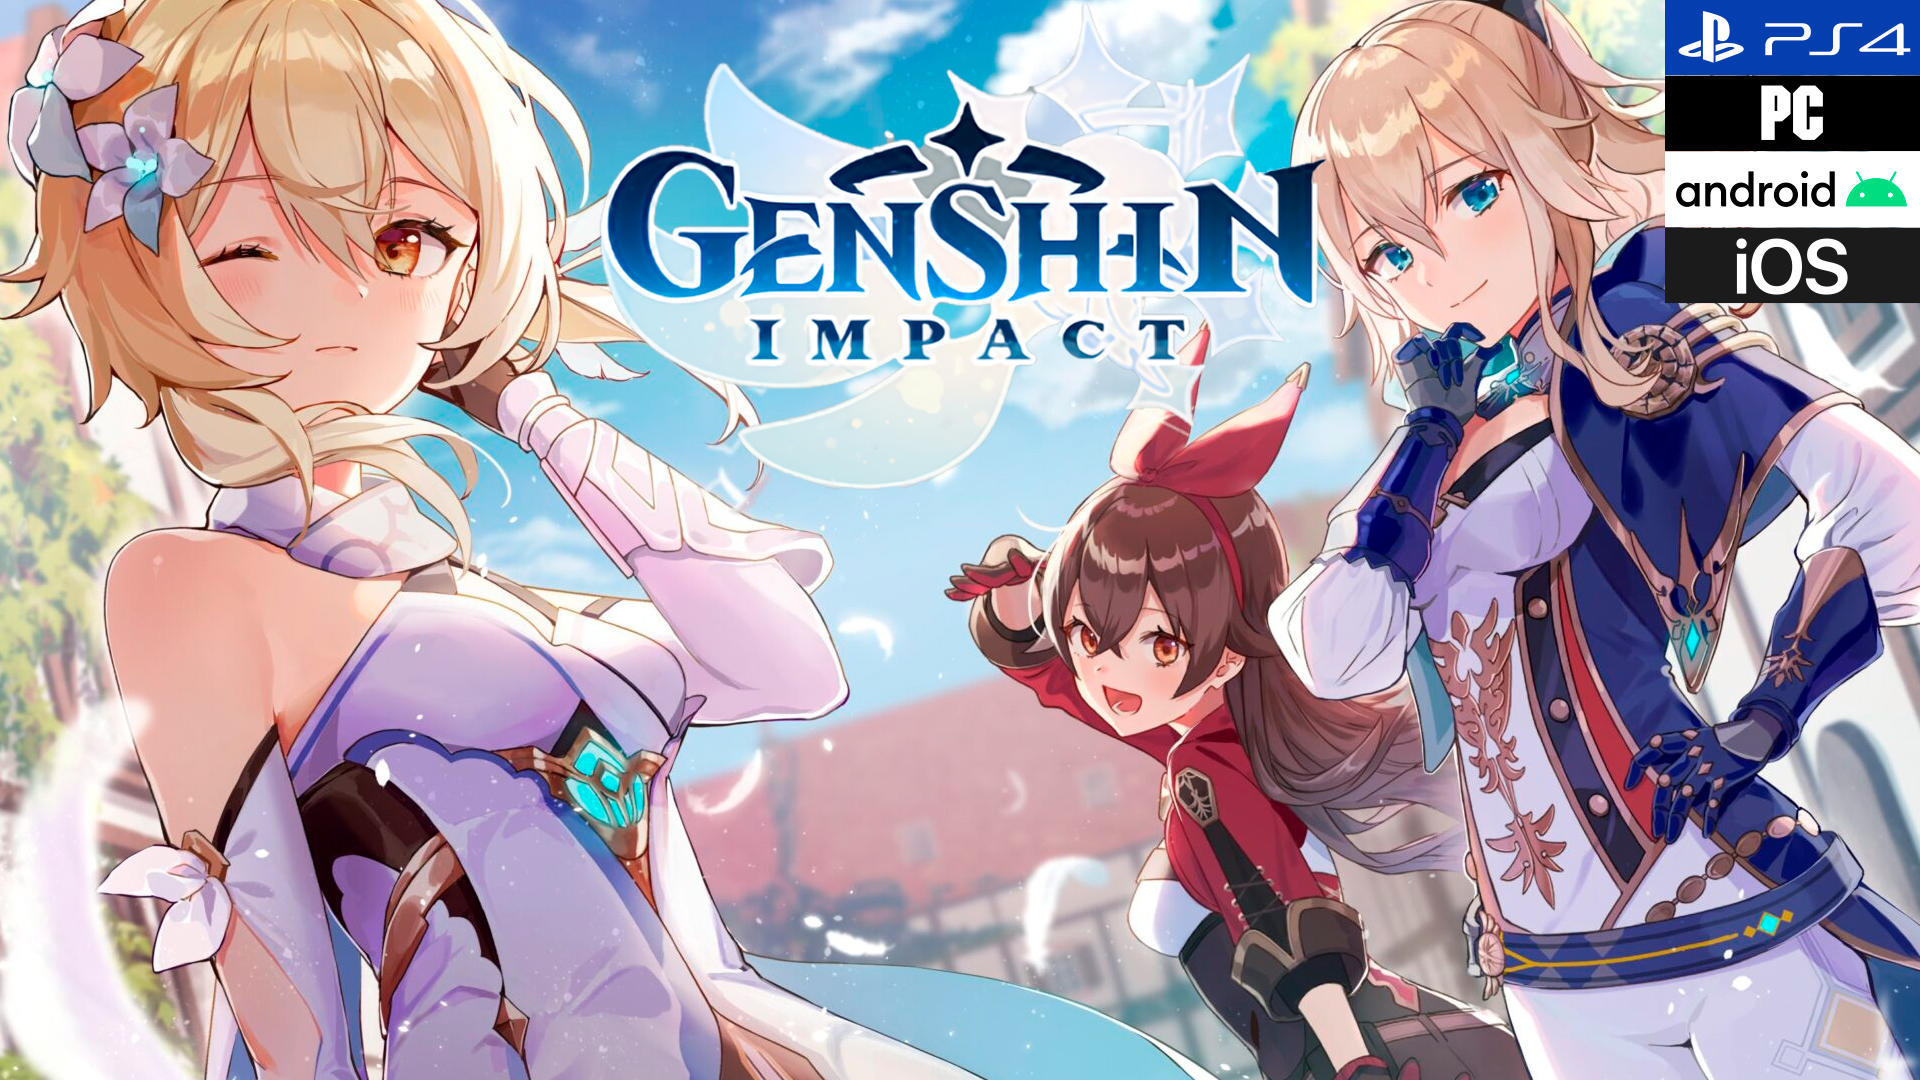 Genshin Impact Review Much More Than Just A Gacha BoTW | lupon.gov.ph